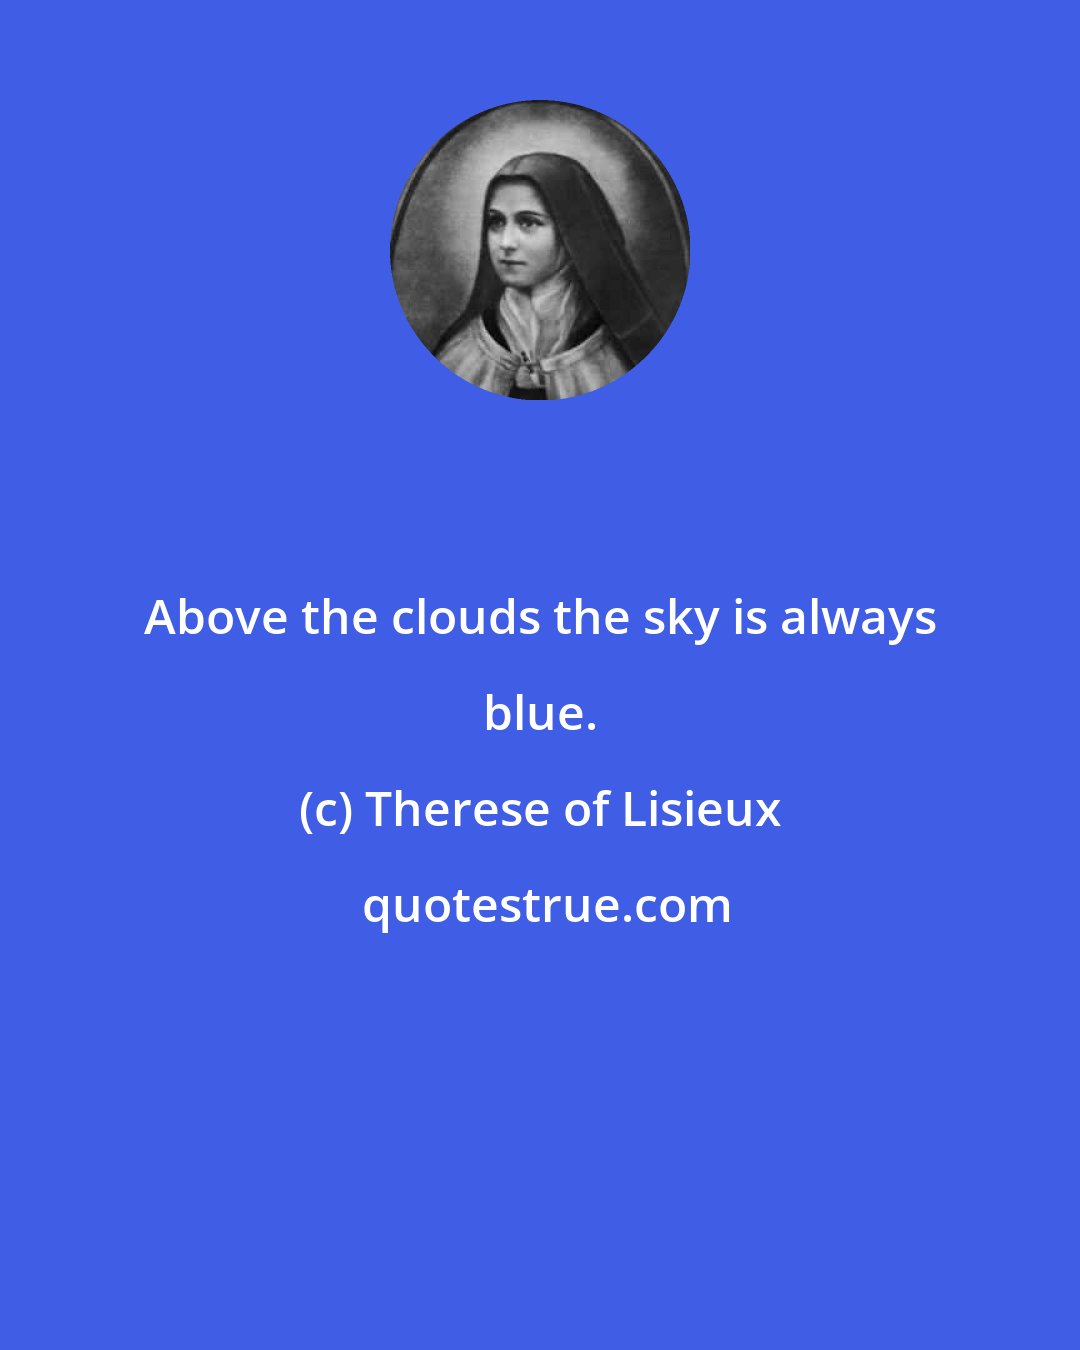 Therese of Lisieux: Above the clouds the sky is always blue.